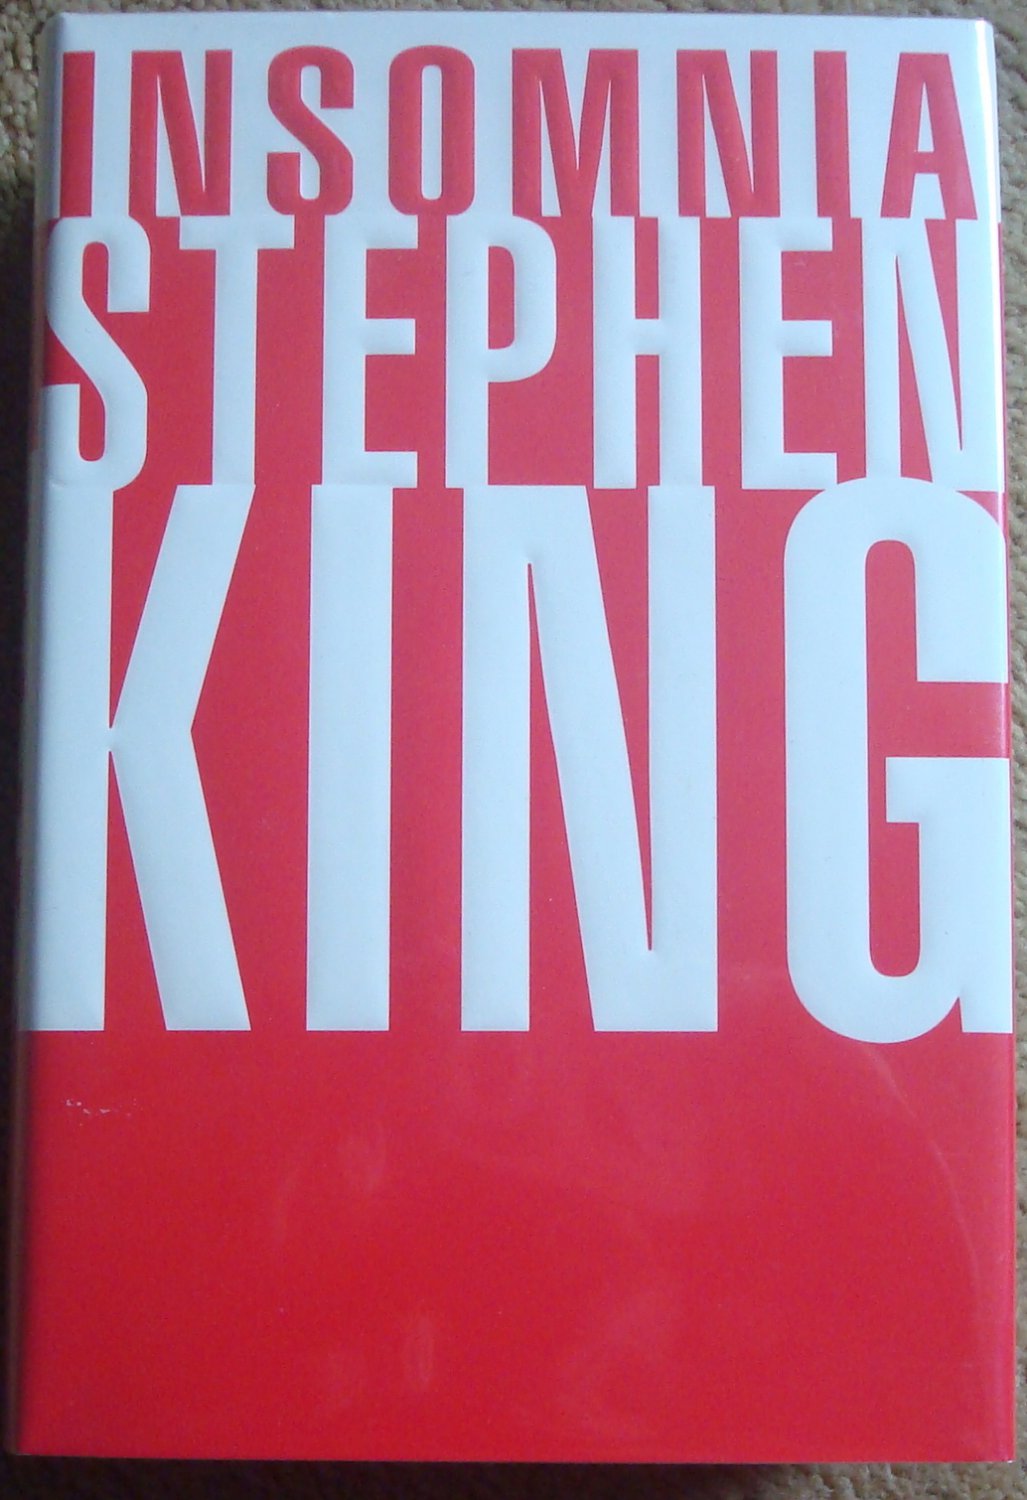 Insomnia - Stephen King, First Edition, Printing HC